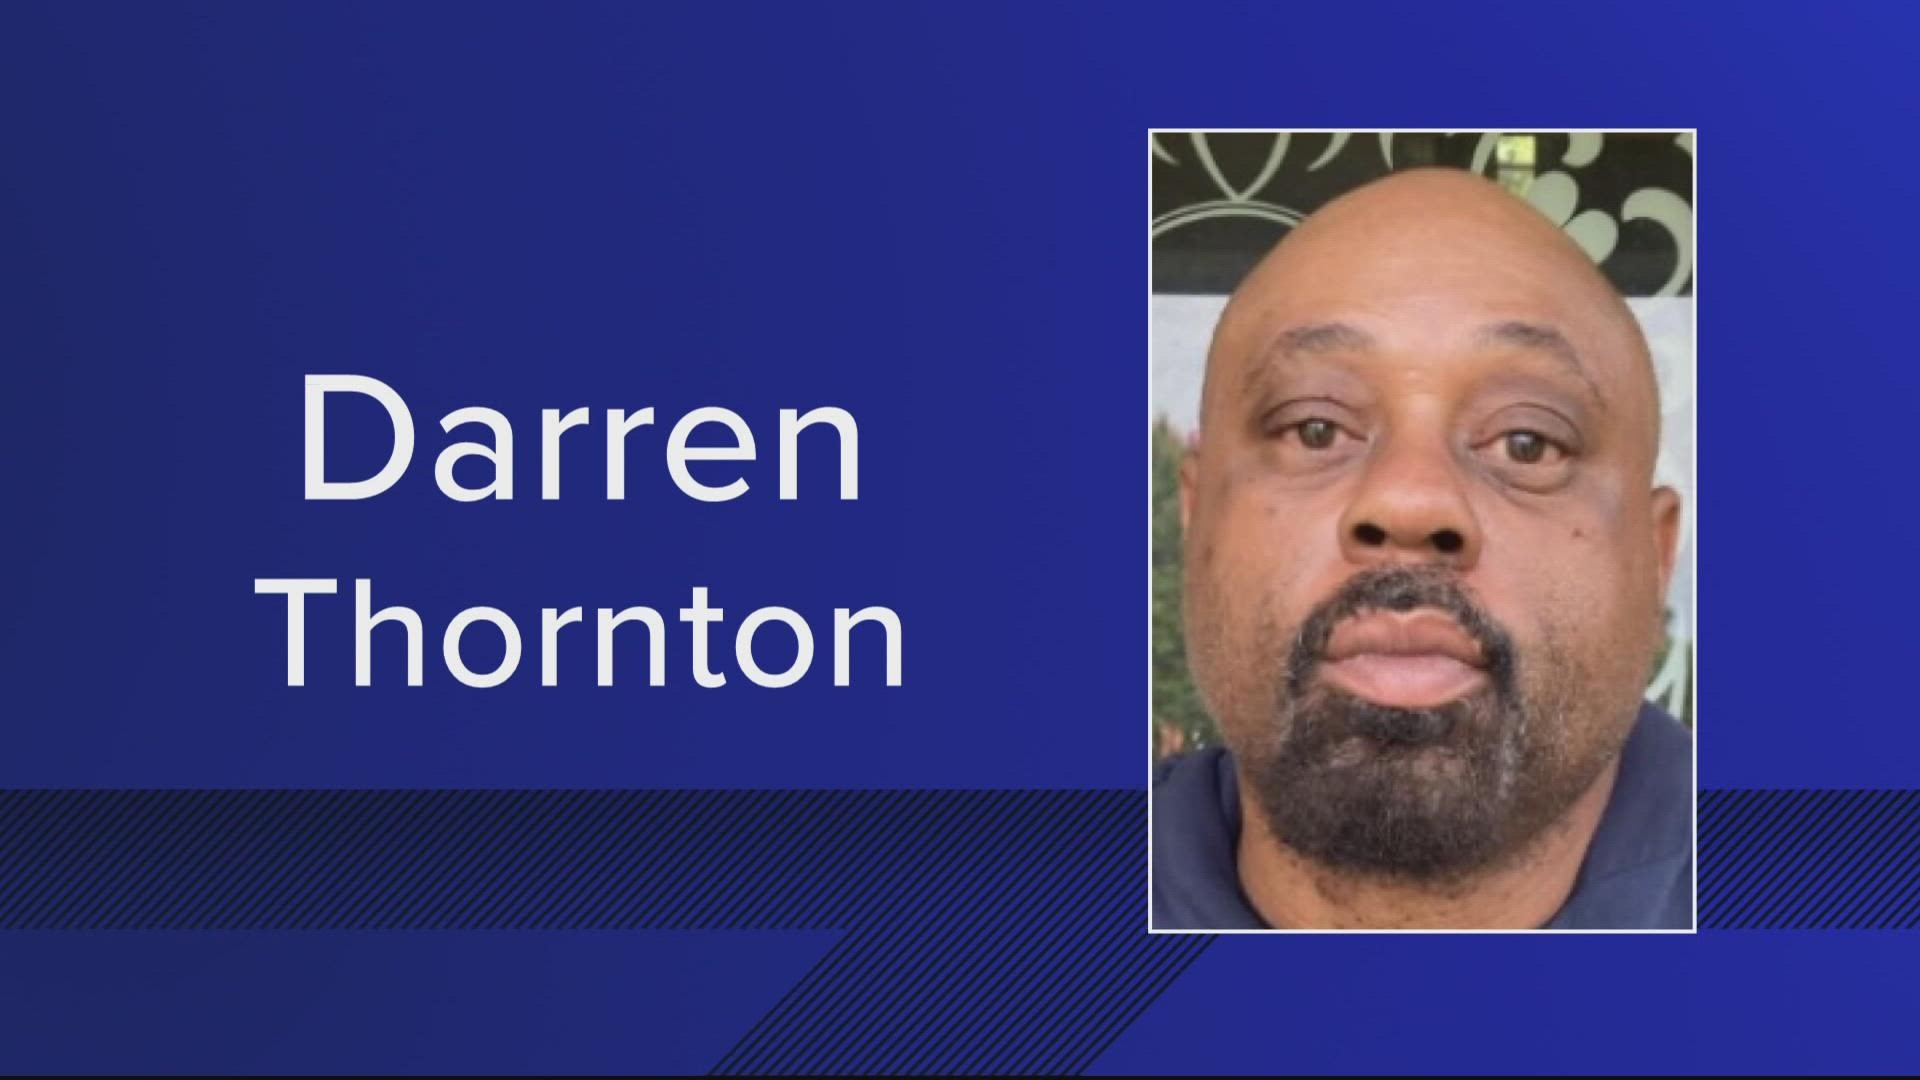 Darren Thornton stayed on the job for 20 months after he was arrested for soliciting prostitution from a minor.